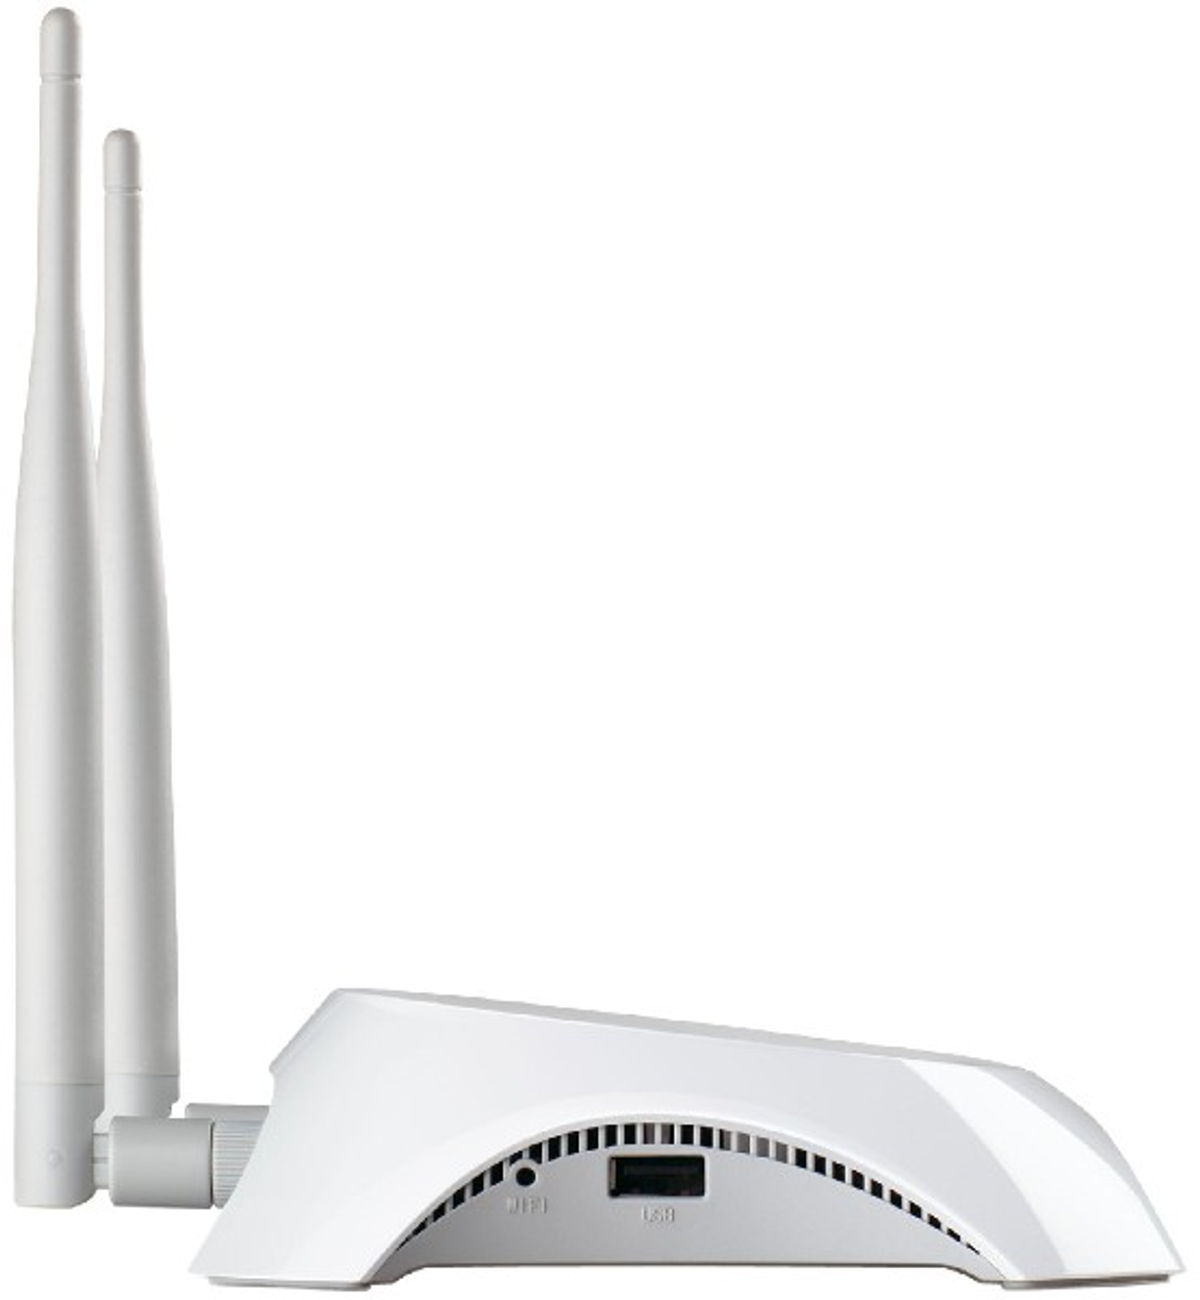 WLAN 3G/4G TL-MR3420 TP-LINK Router WLAN Router